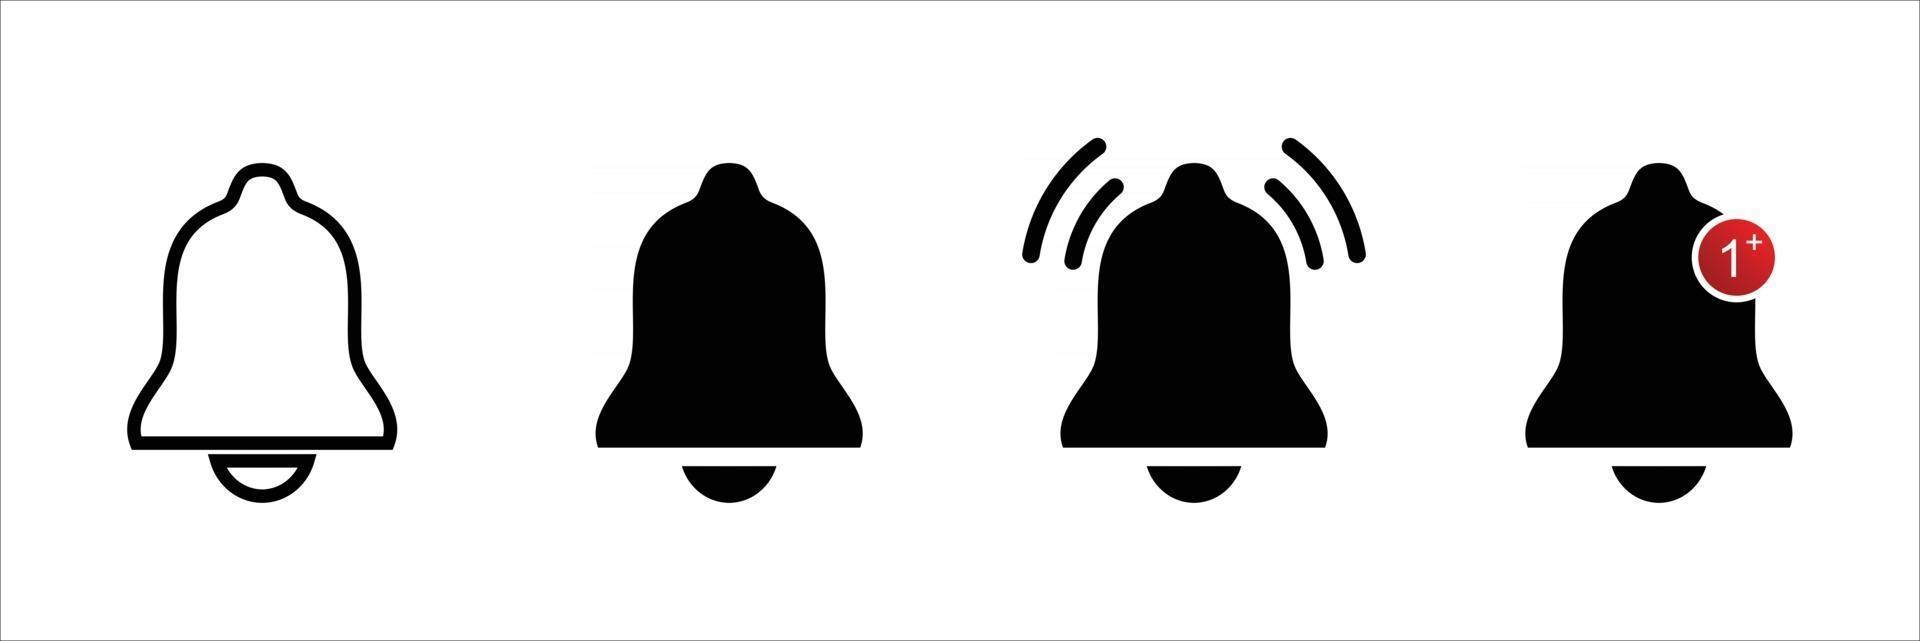 Bell Vector Art, Icons, and Graphics for Free Download